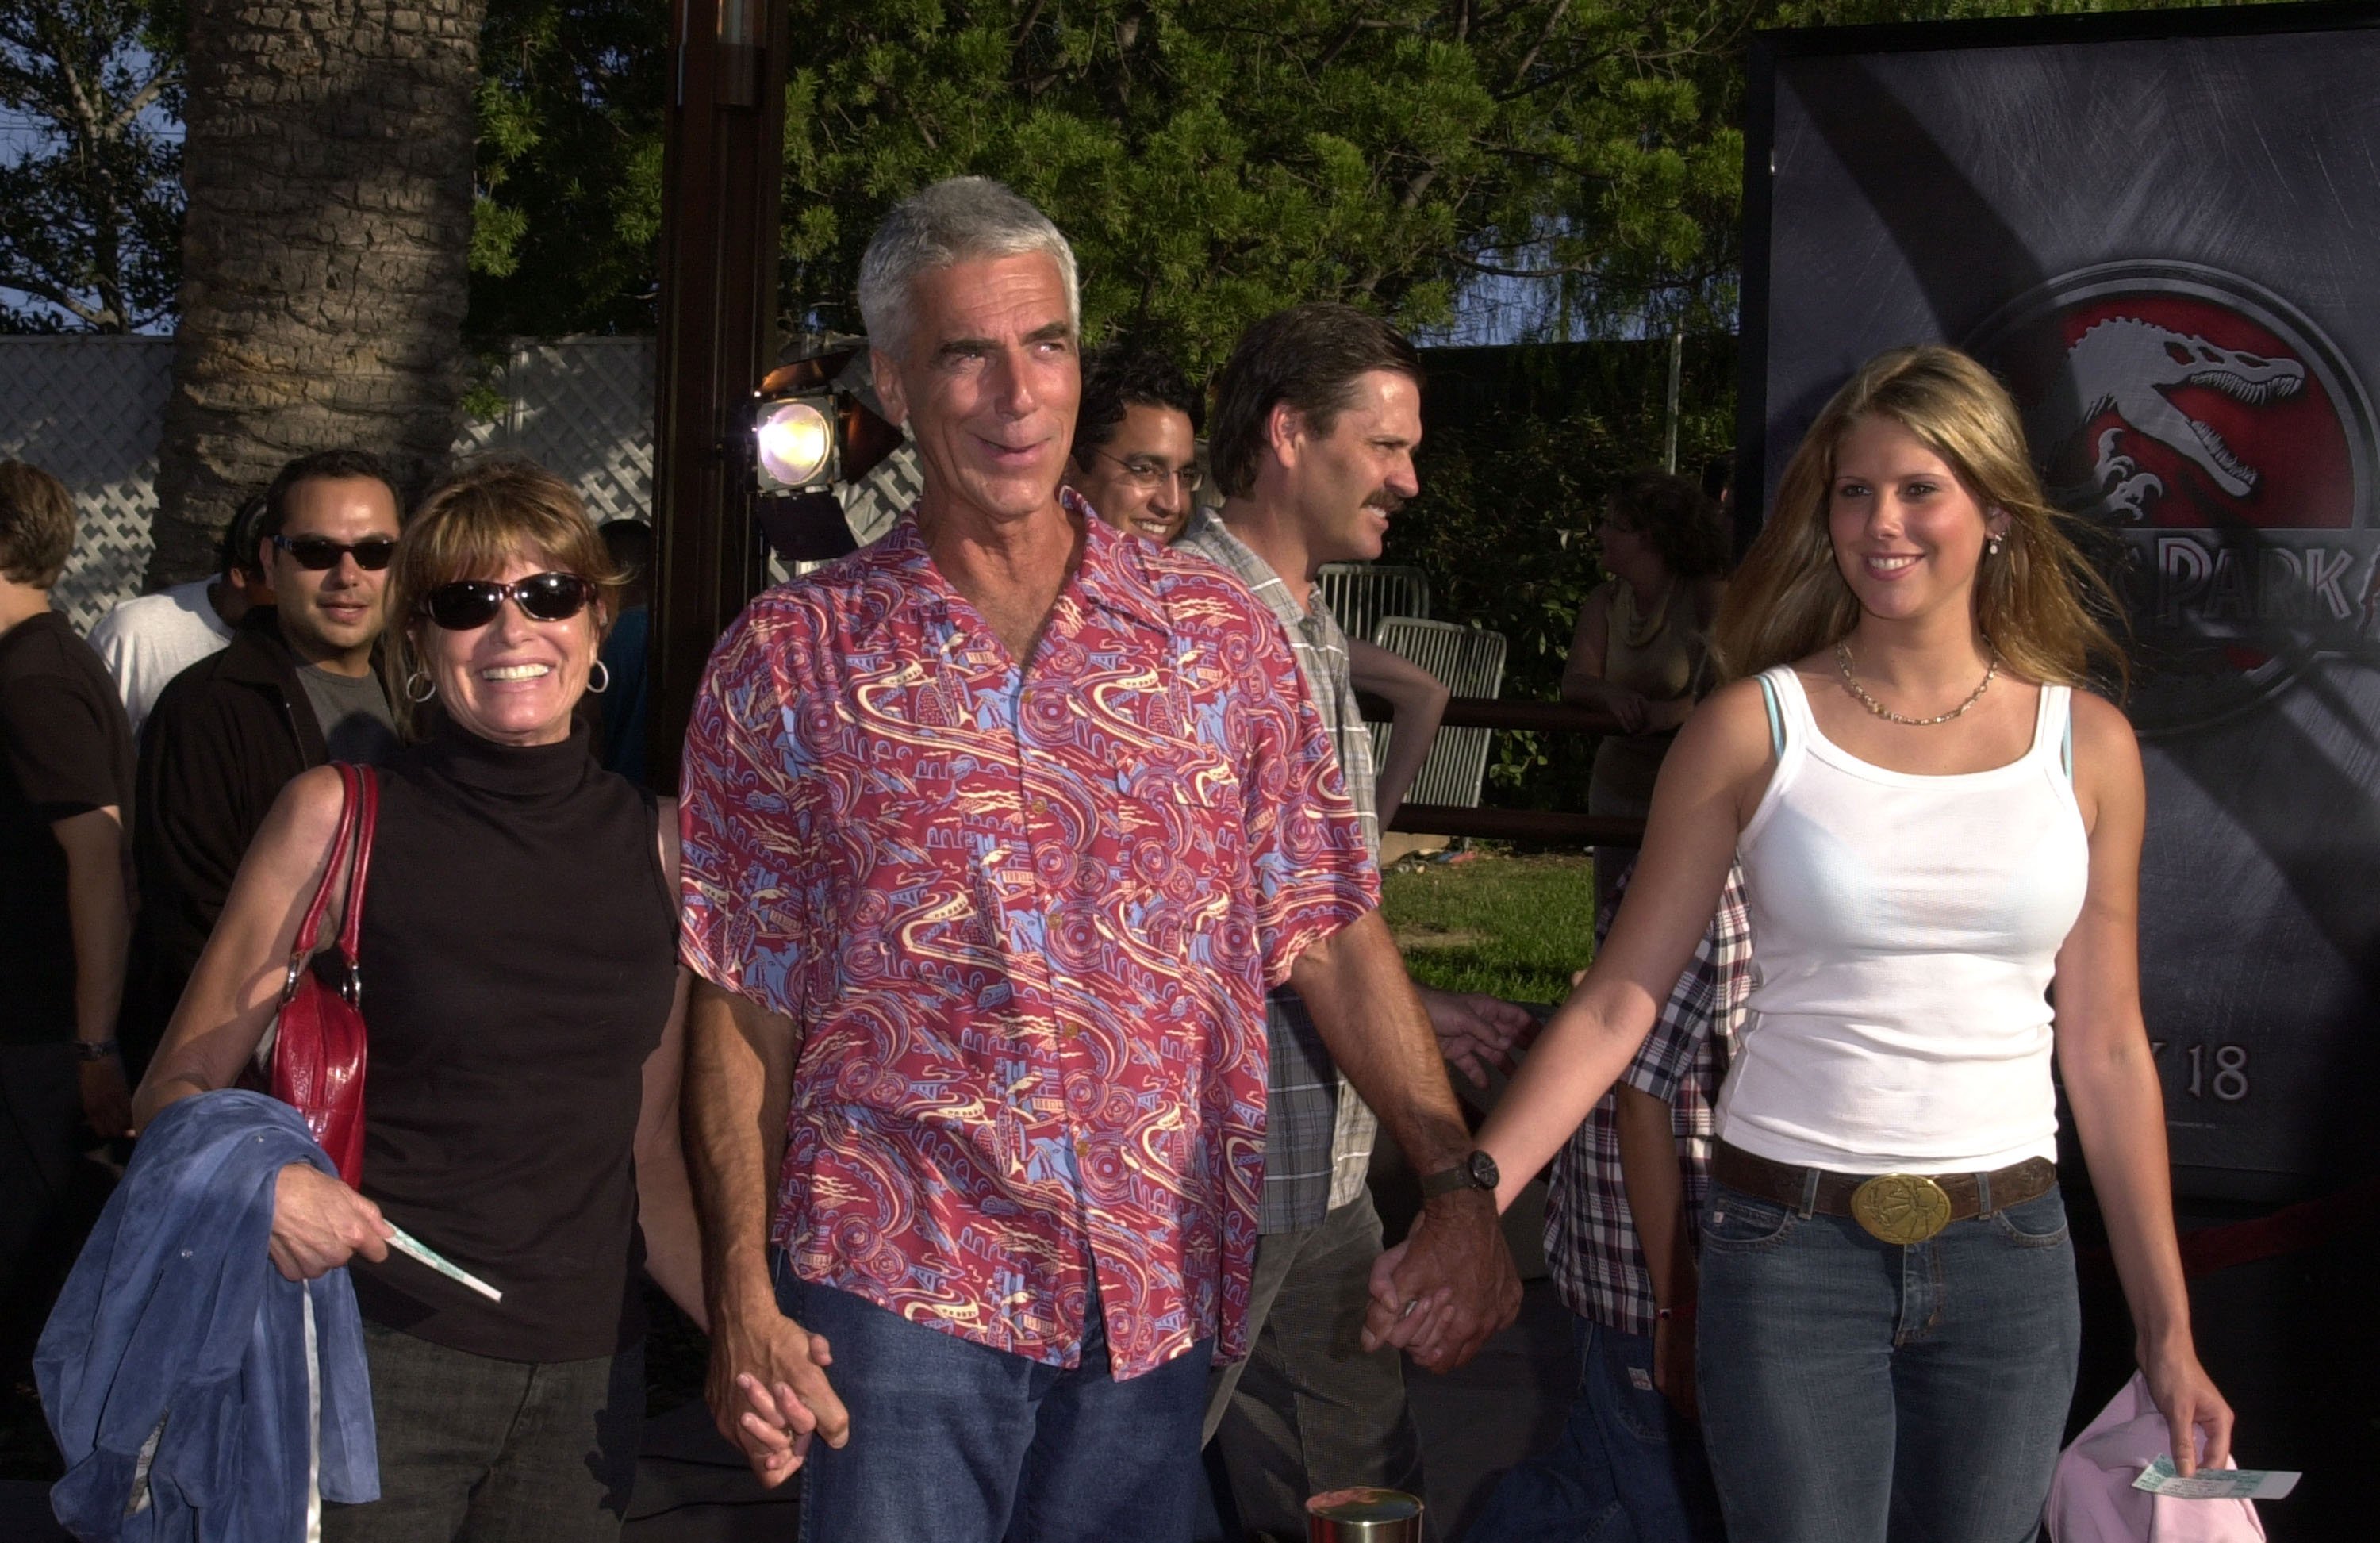 Katharine Ross, Sam Elliott, and daughter Cleo during Jurassic Park III Premiere - July 16, 2001, at Universal Amphitheatre in Universal City, California, United States. | Source: Getty Images